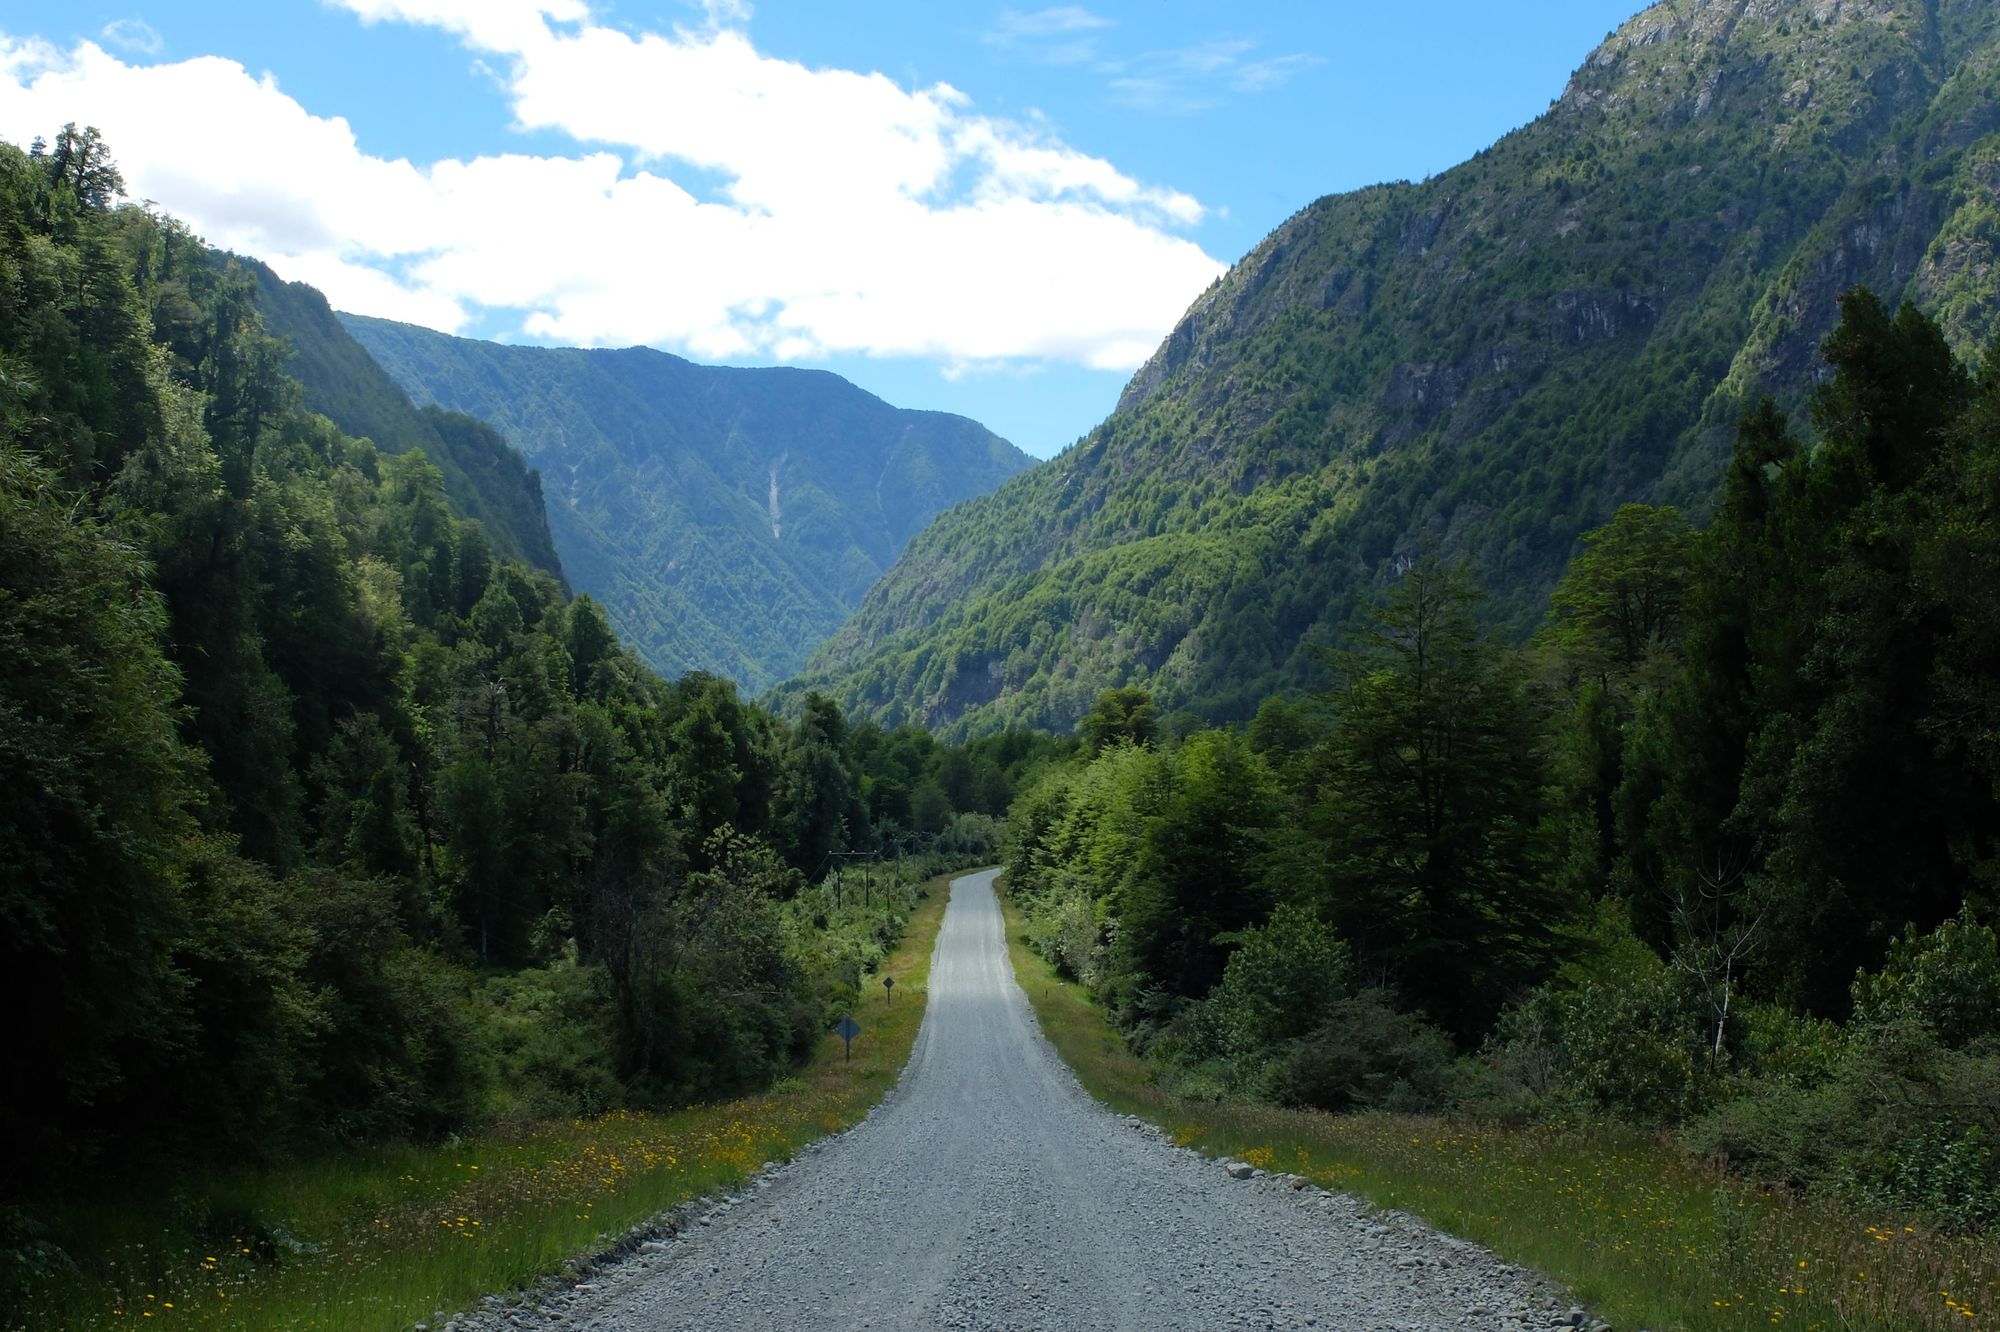 The road on. There's always another landscape to be seen on the Carretera Austral. Photo: Adam Roberts